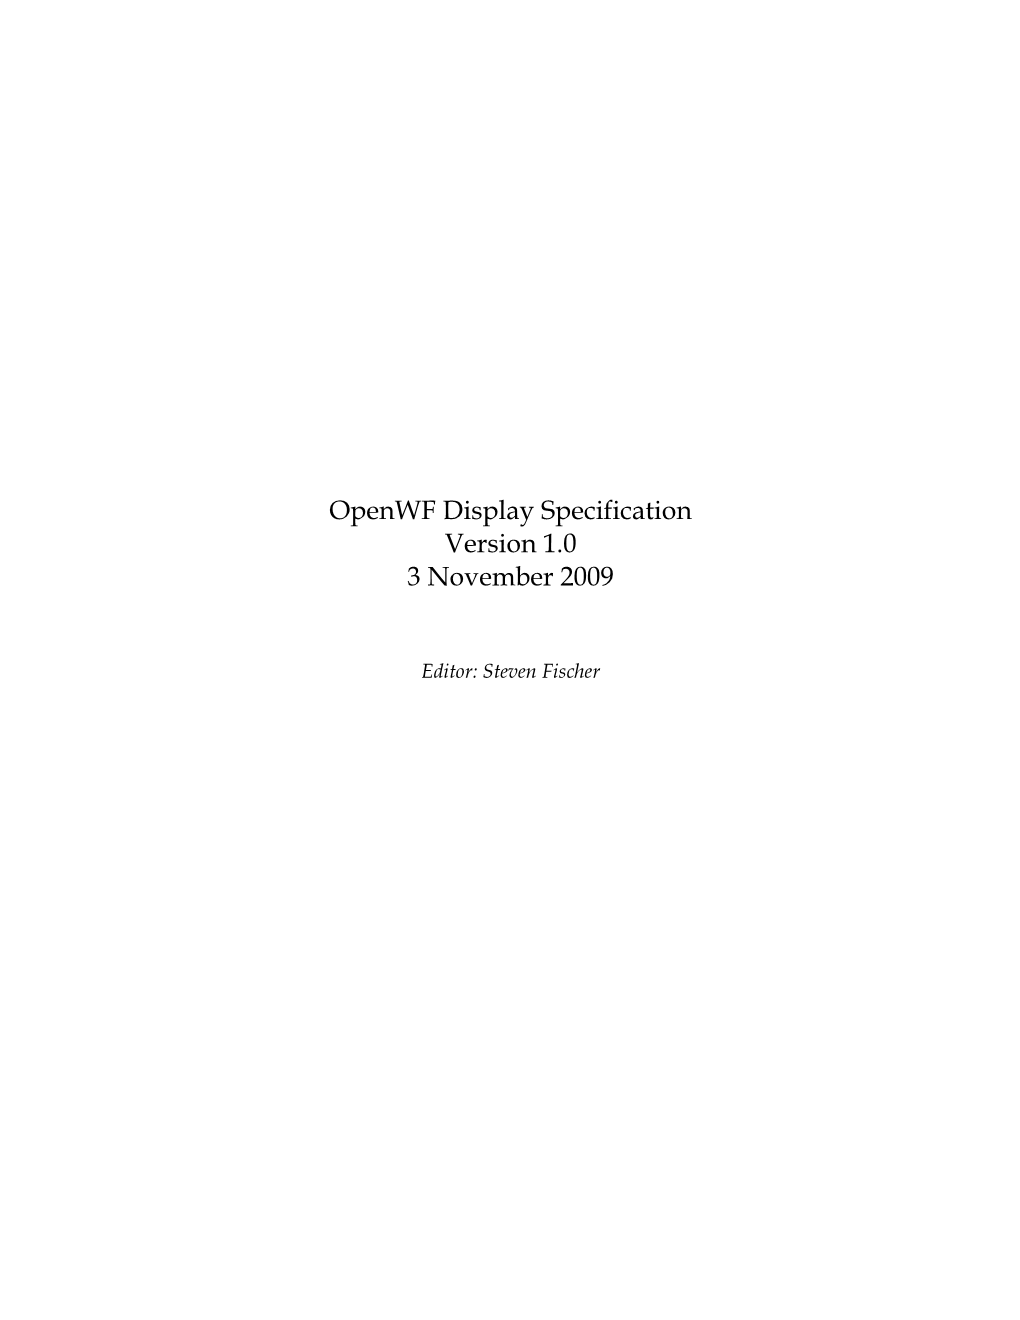 Openwf Display Specification Version 1.0 3 November 2009